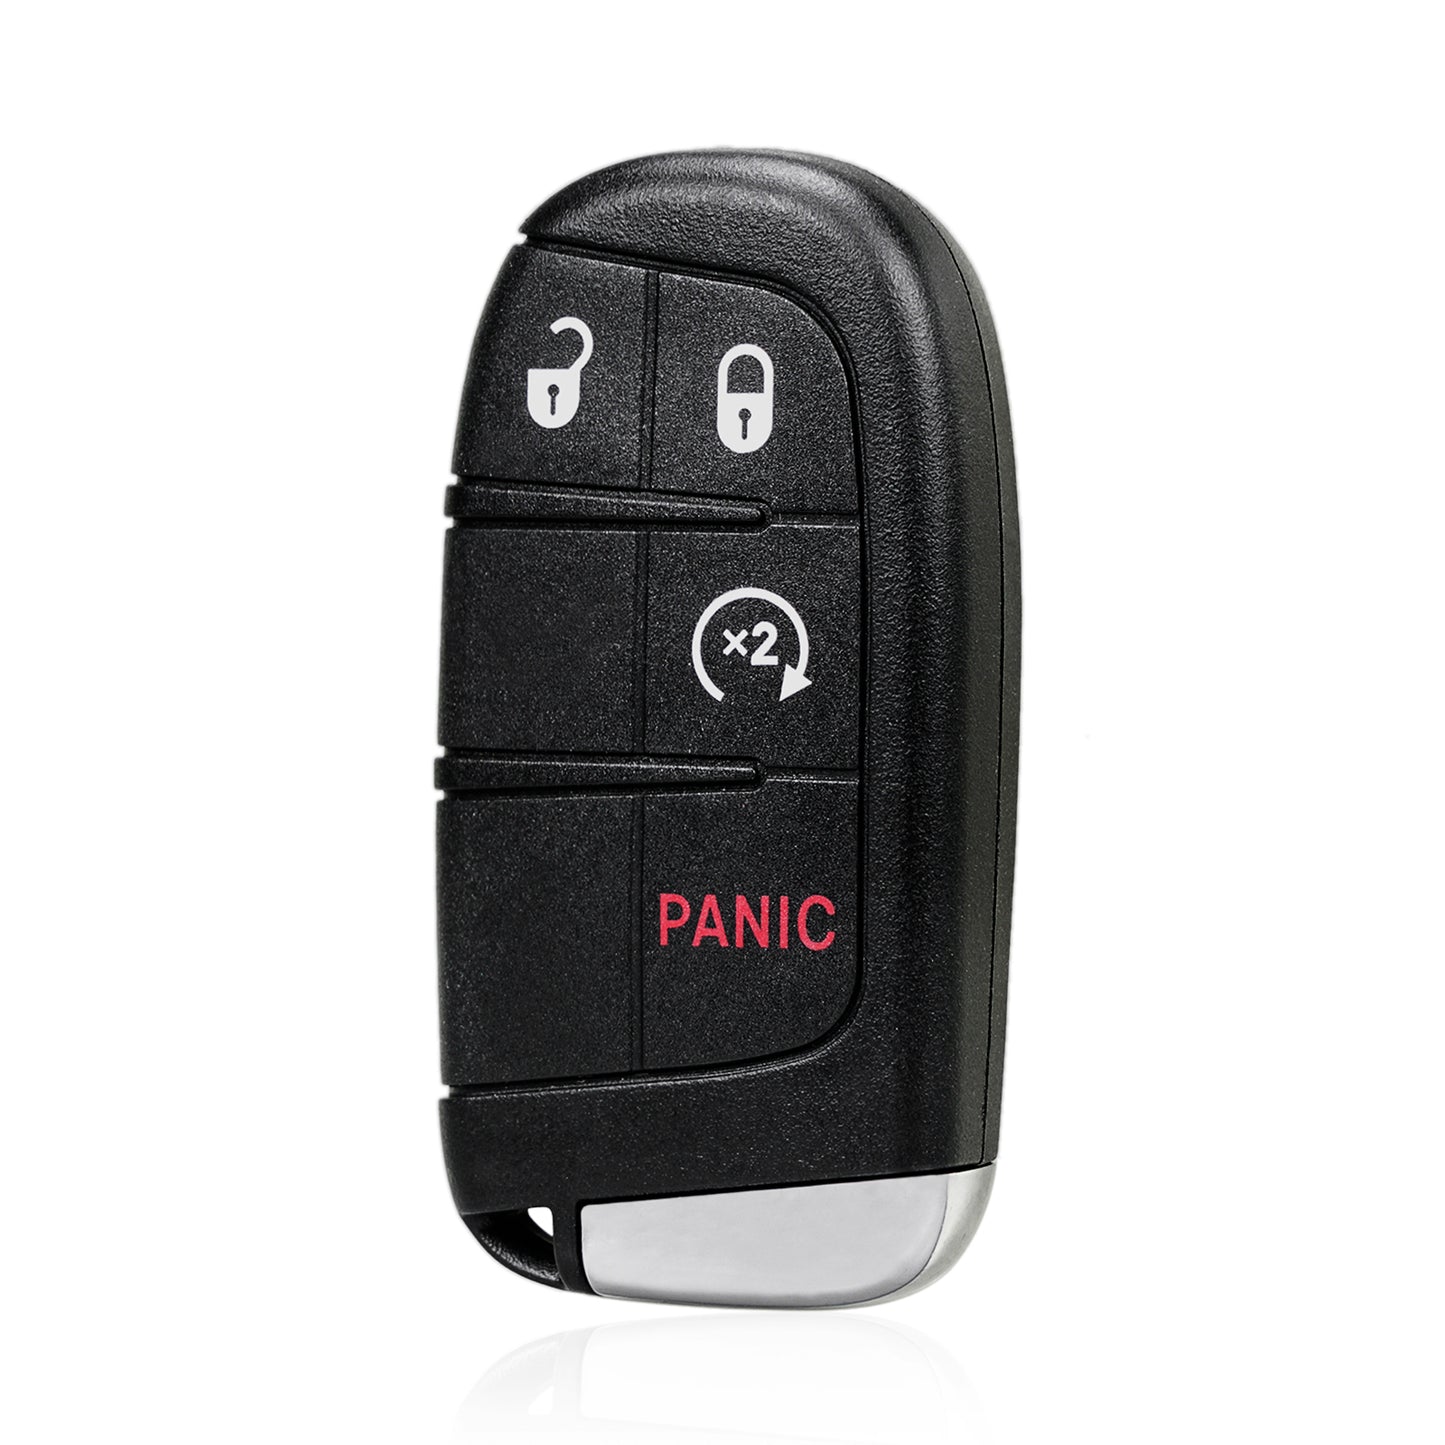 4 Buttons 433MHz Keyless Entry Fob Remote Car Key For 2015-2021 Jeep Renegade Compass (New Body Style) FCC ID: M3N-40821302 SKU : J721